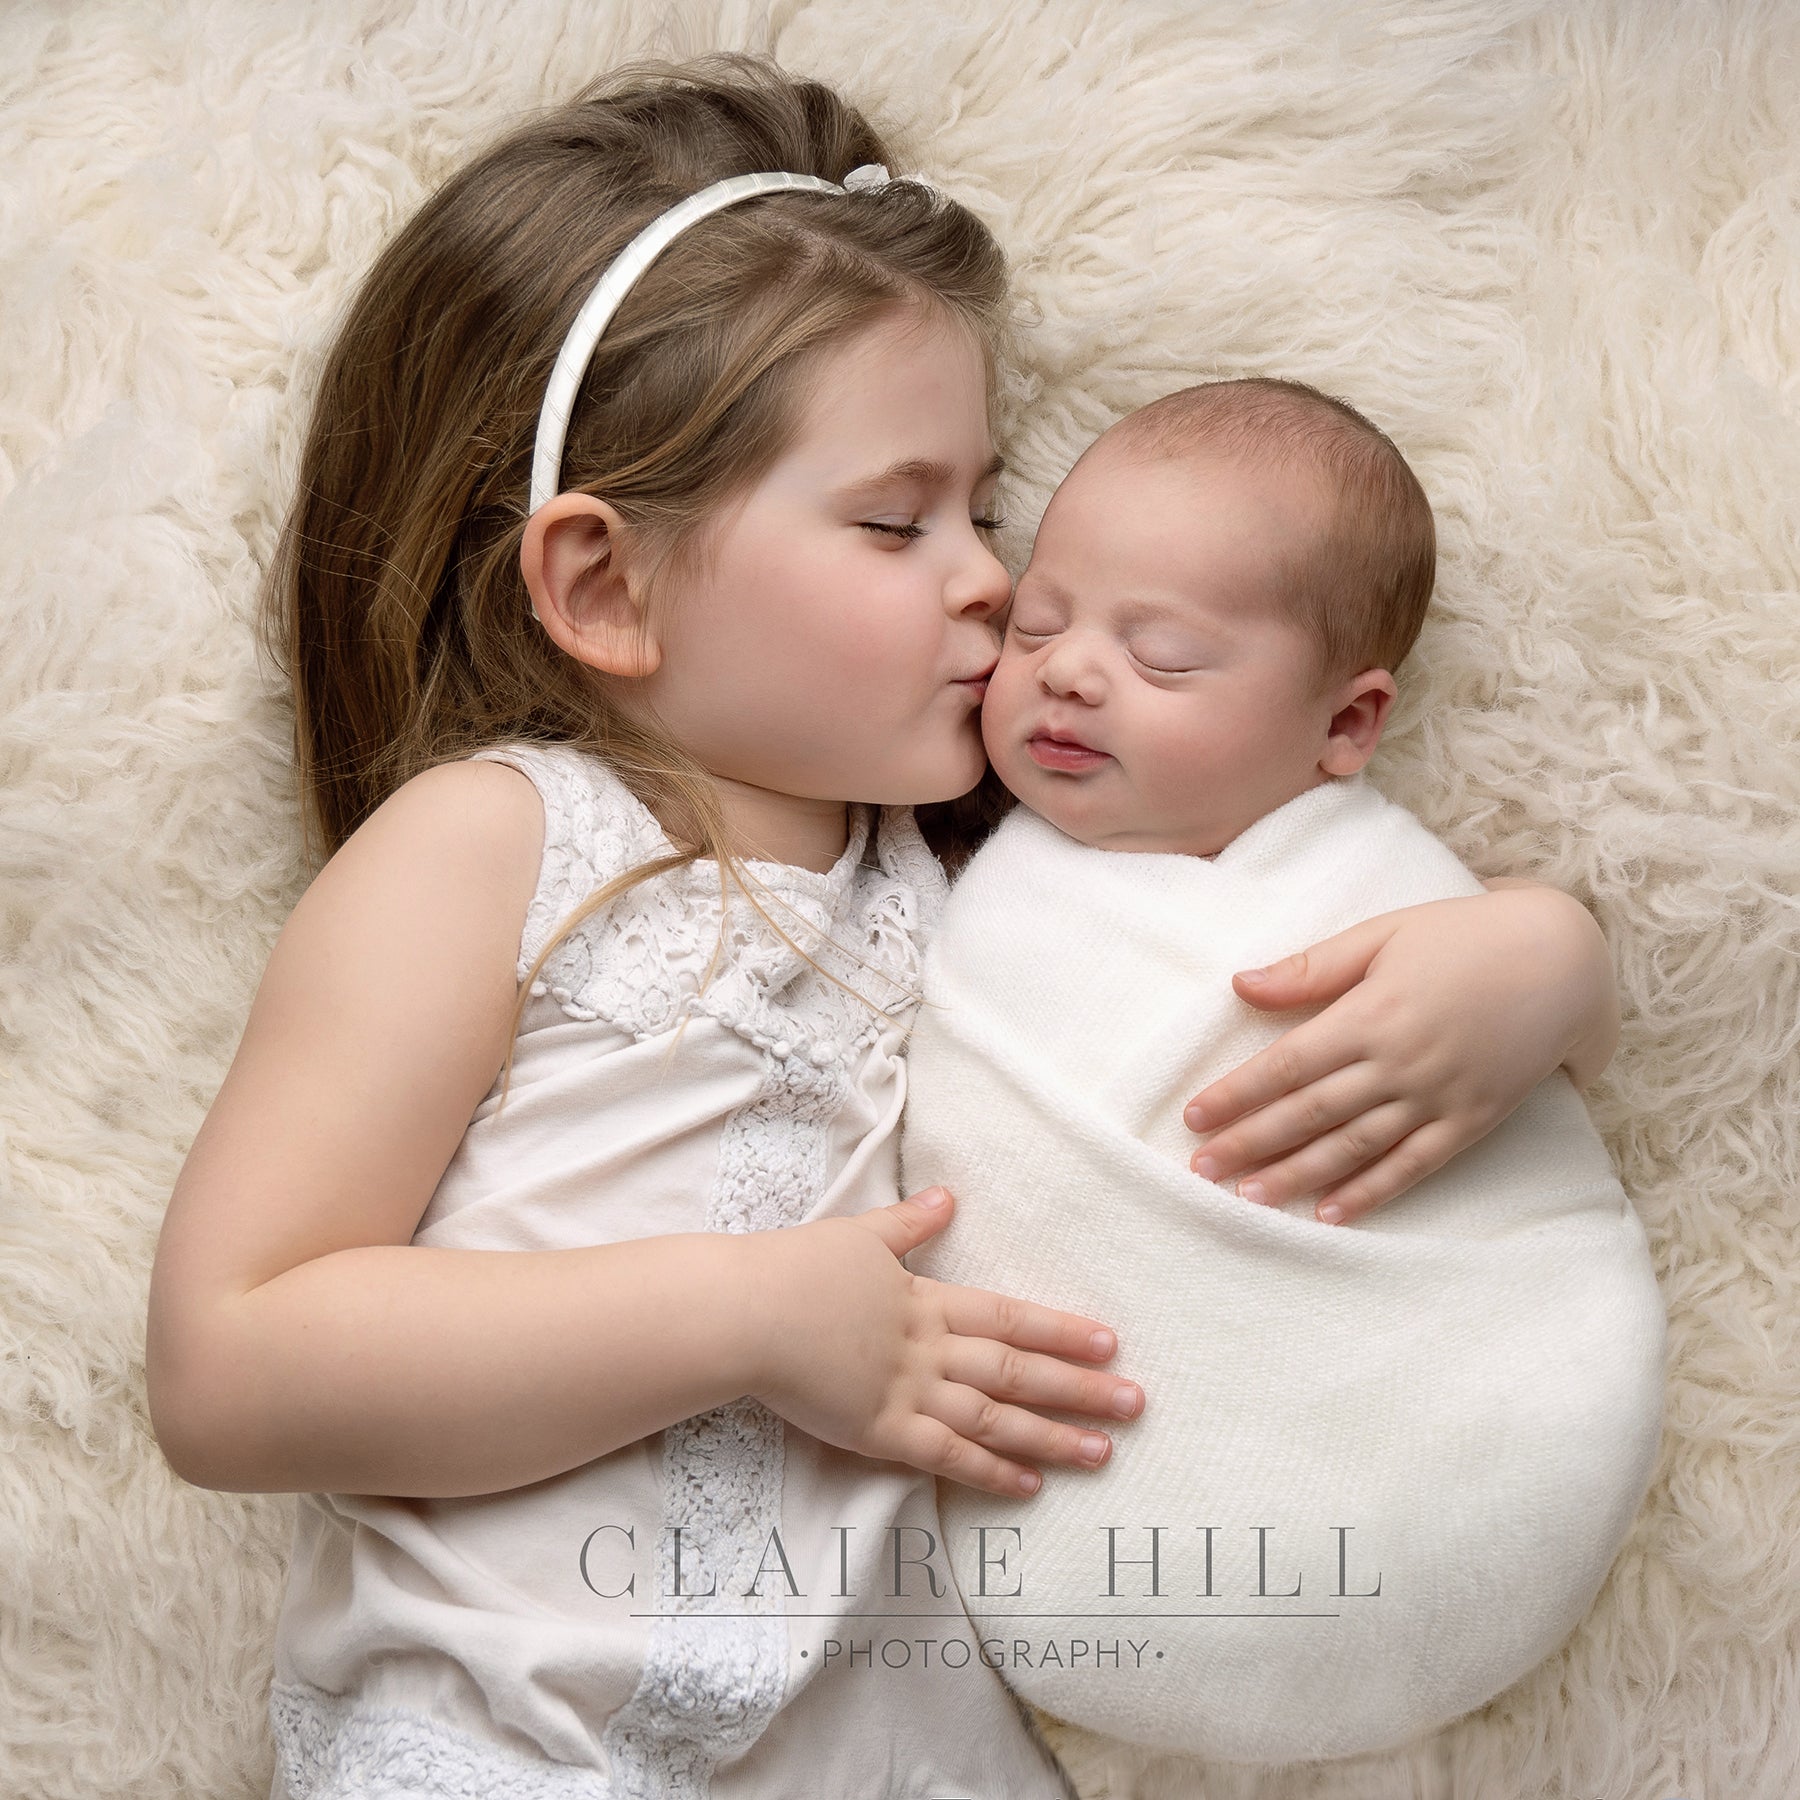 Professional sisters sibling photography photos by Claire Hill Photography. Studio based in  Perton Wolverhampton West Midlands and Shropshire book todays and Shropshire book today